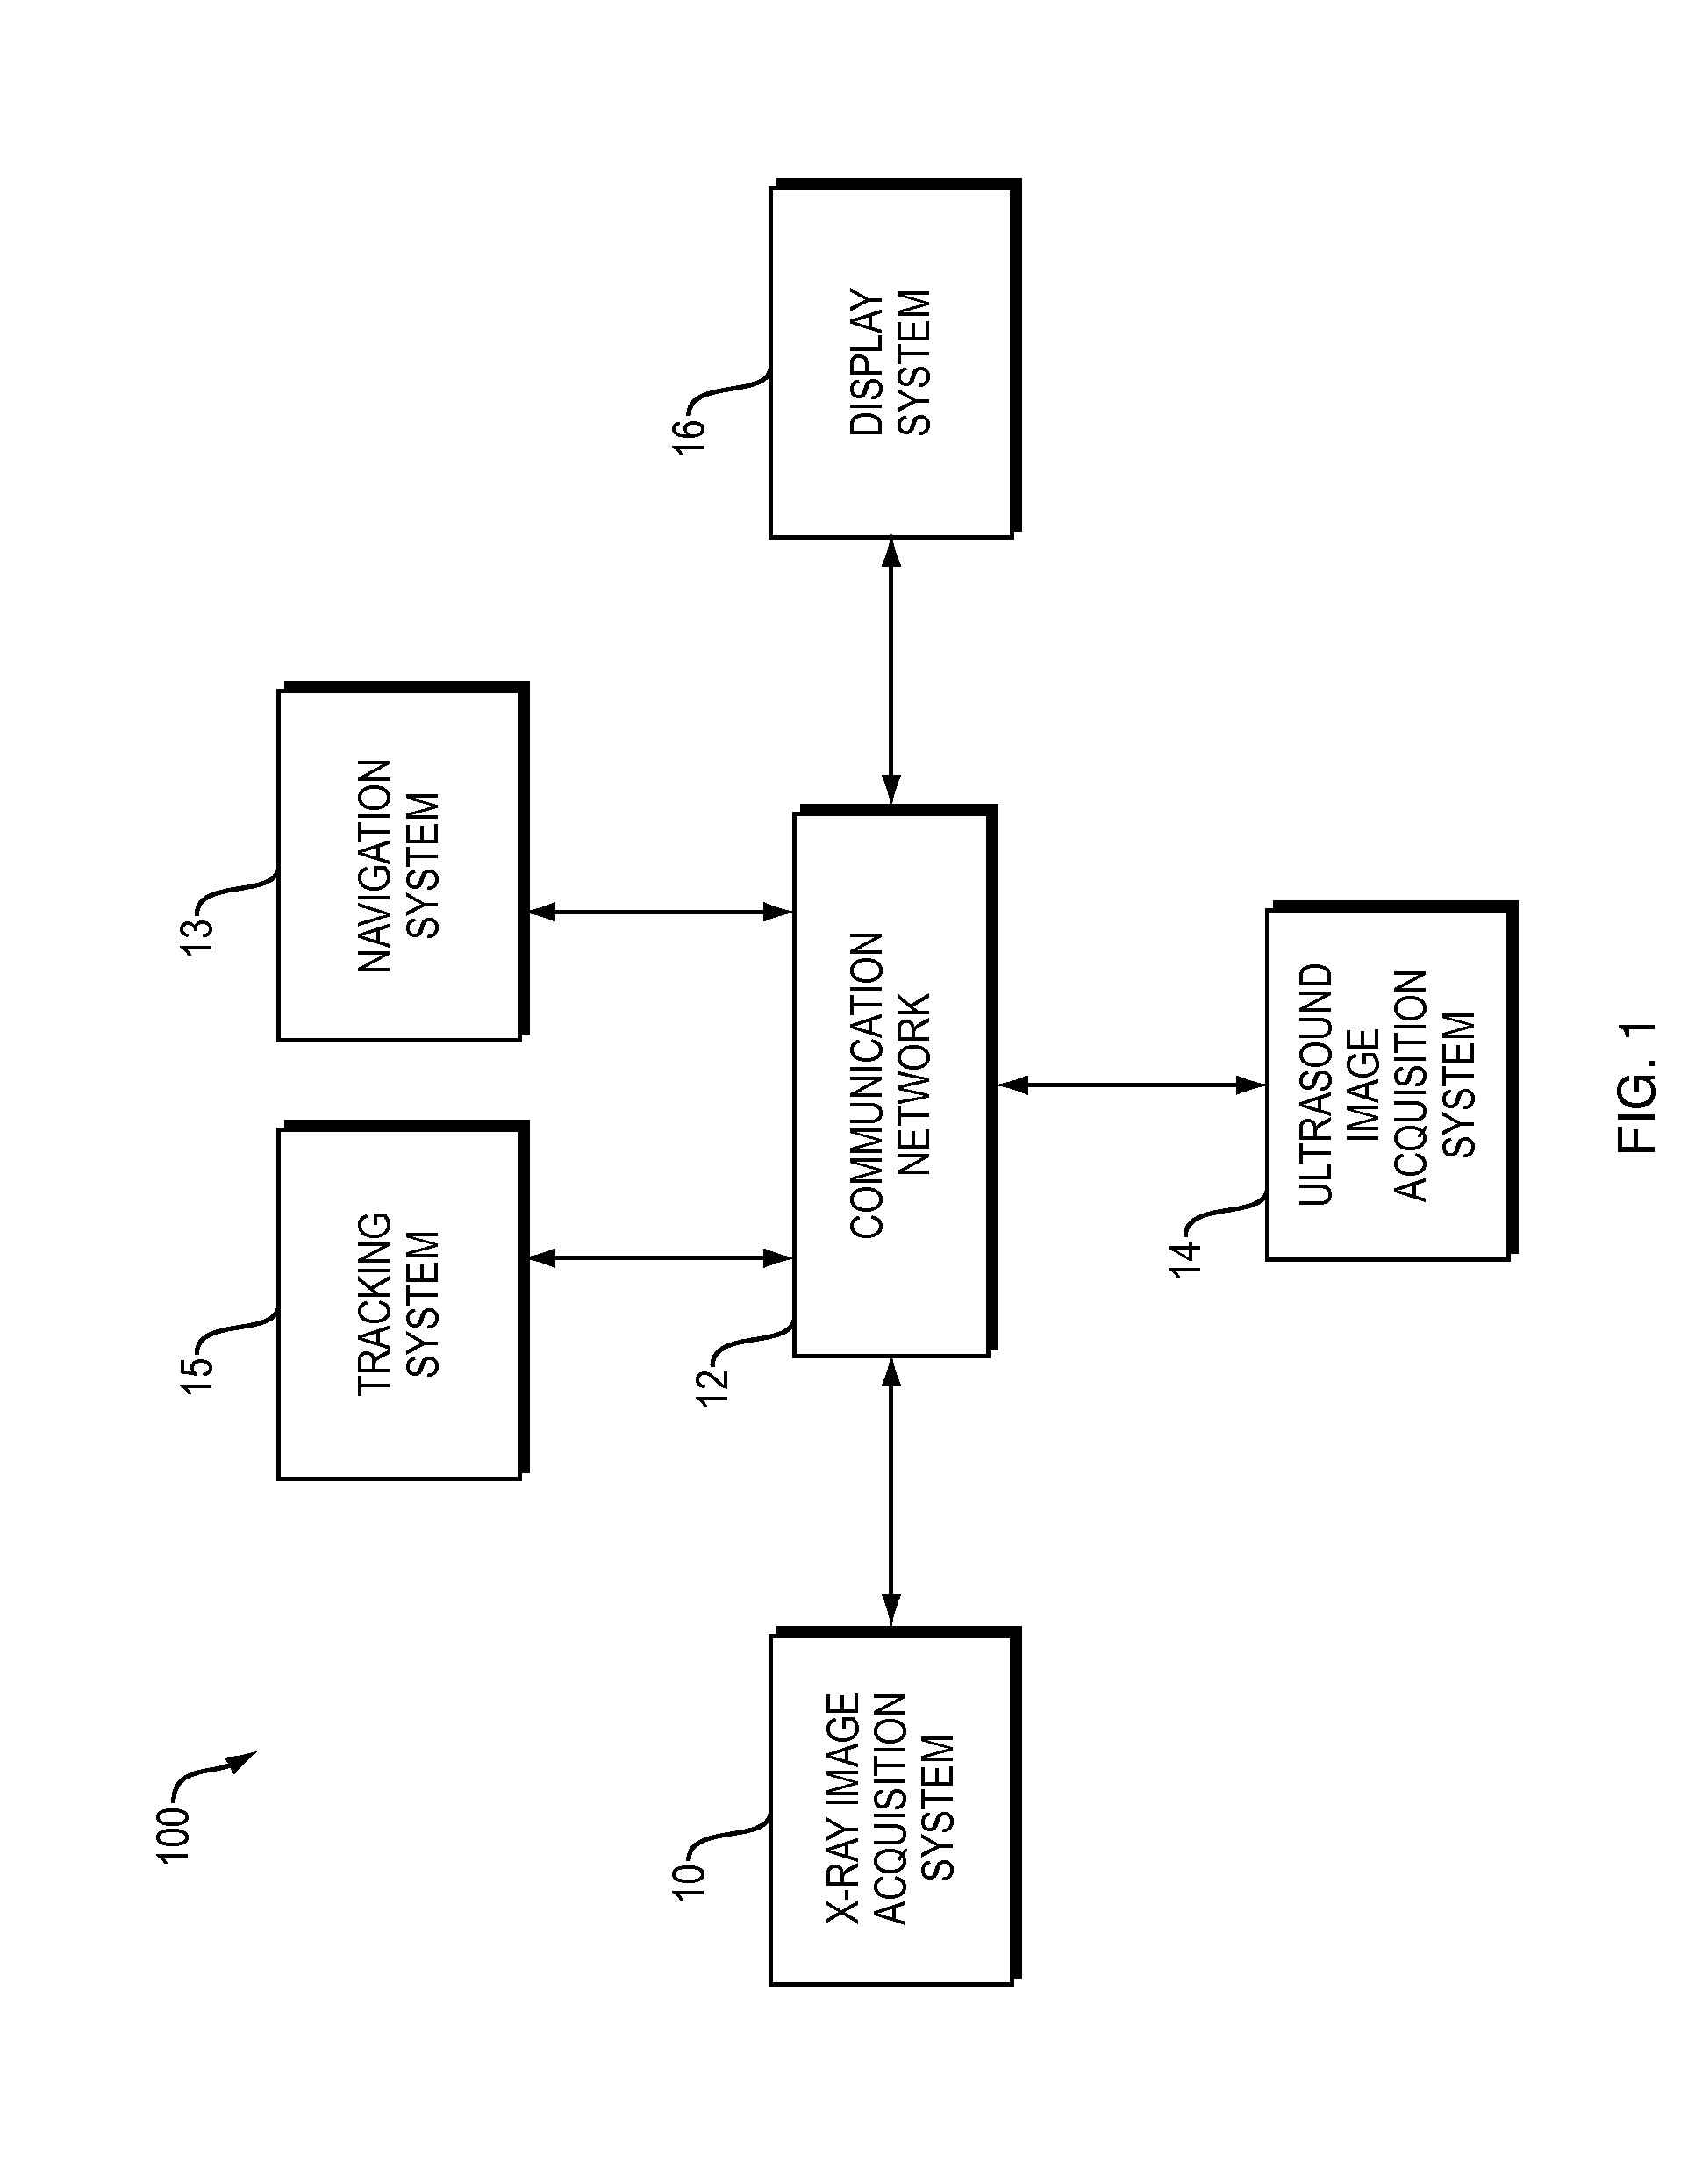 System and Method for Fusing Three Dimensional Image Data from a Plurality of Different Imaging Systems for Use in Diagnostic Imaging